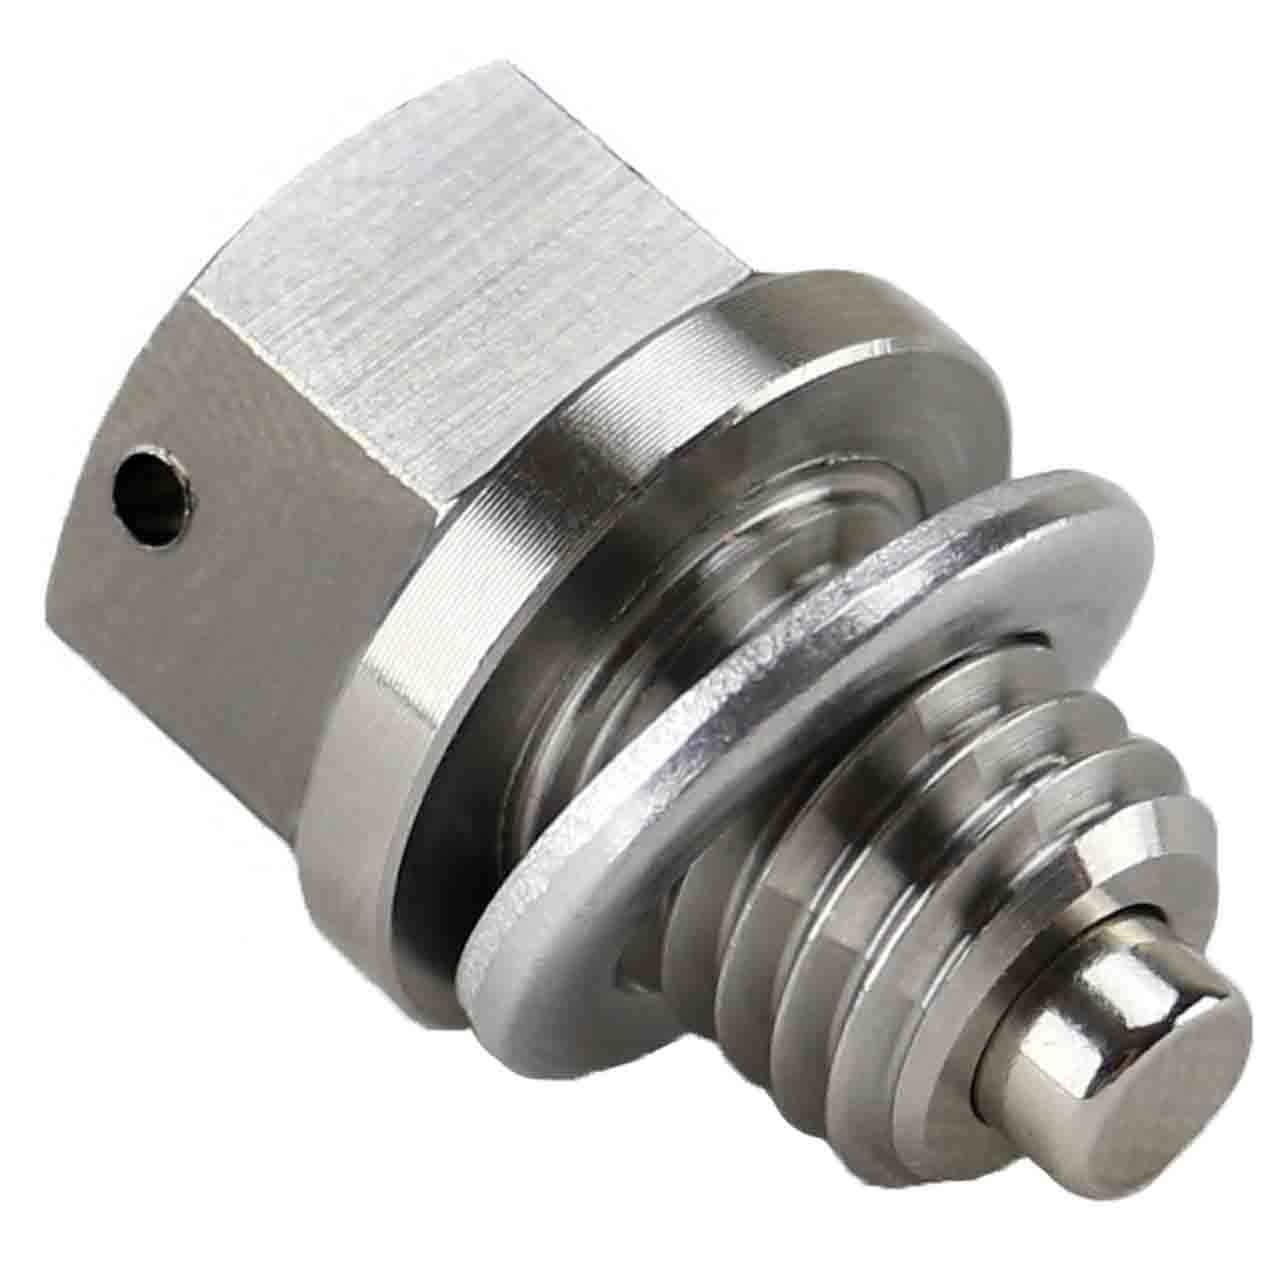 M10 x 1.5 X 12.5MM Stainless Steel ENGINE Magnetic Oil Drain Plug with Neodymium Magnet - Made In USA - Part Number DP025